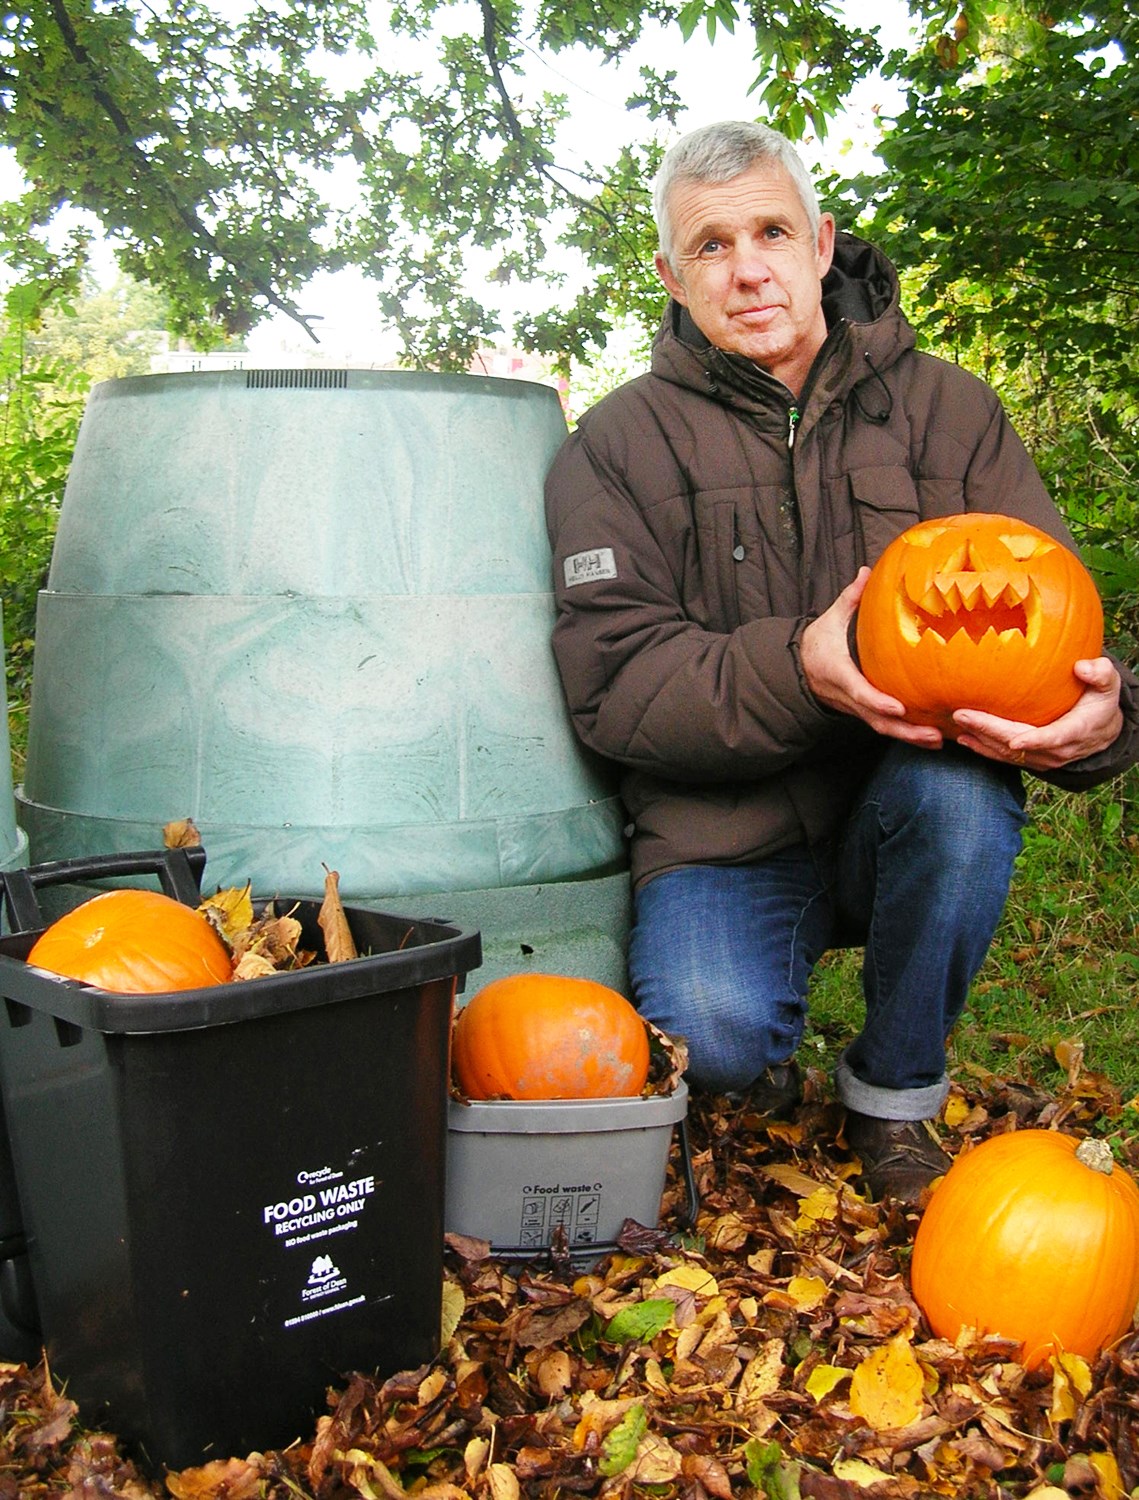 Cllr Phelps with Pumpkins